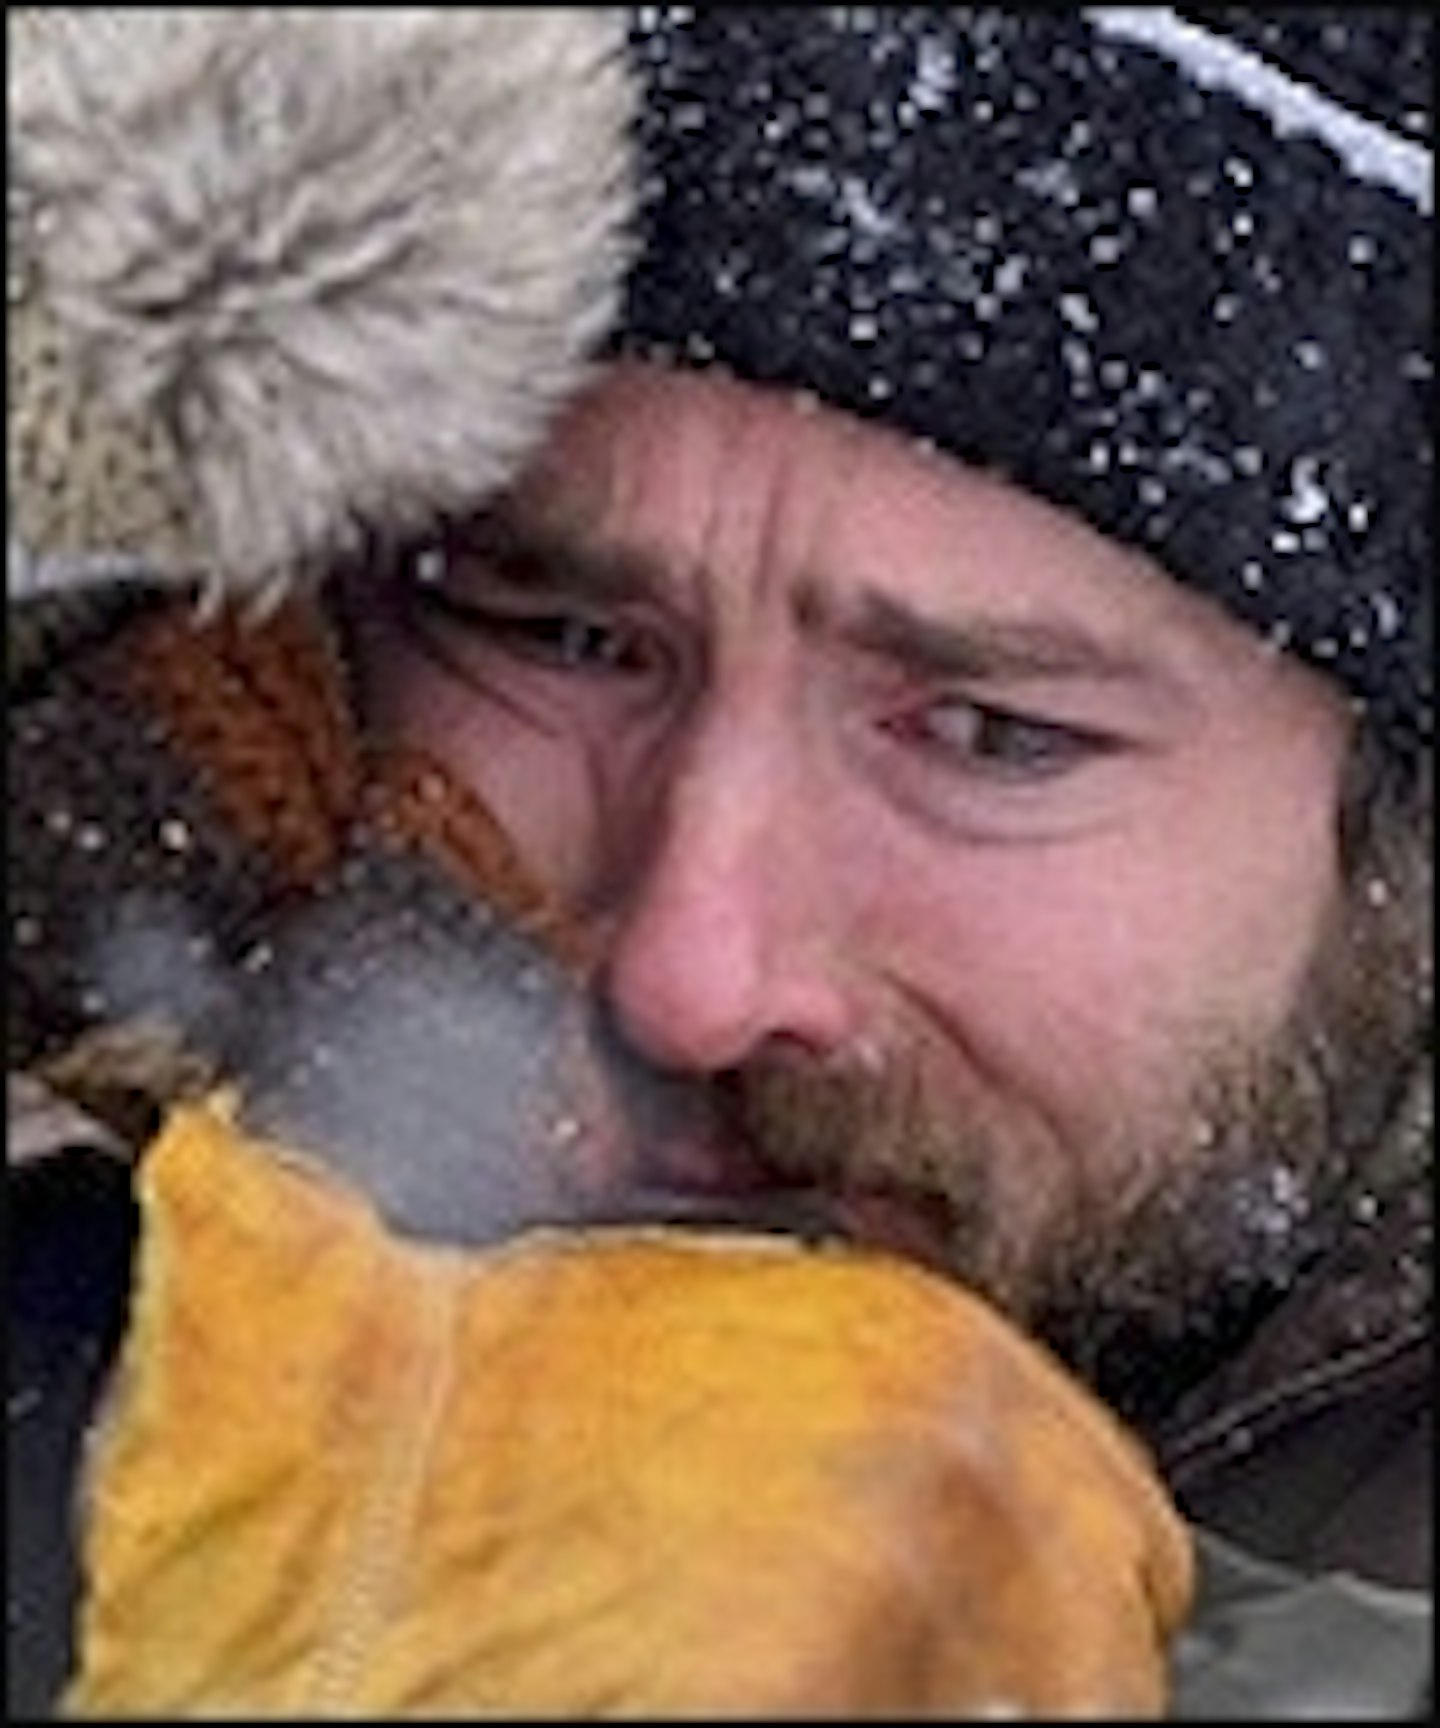 Cannes 2014: First Look At Atom Egoyan's The Captive